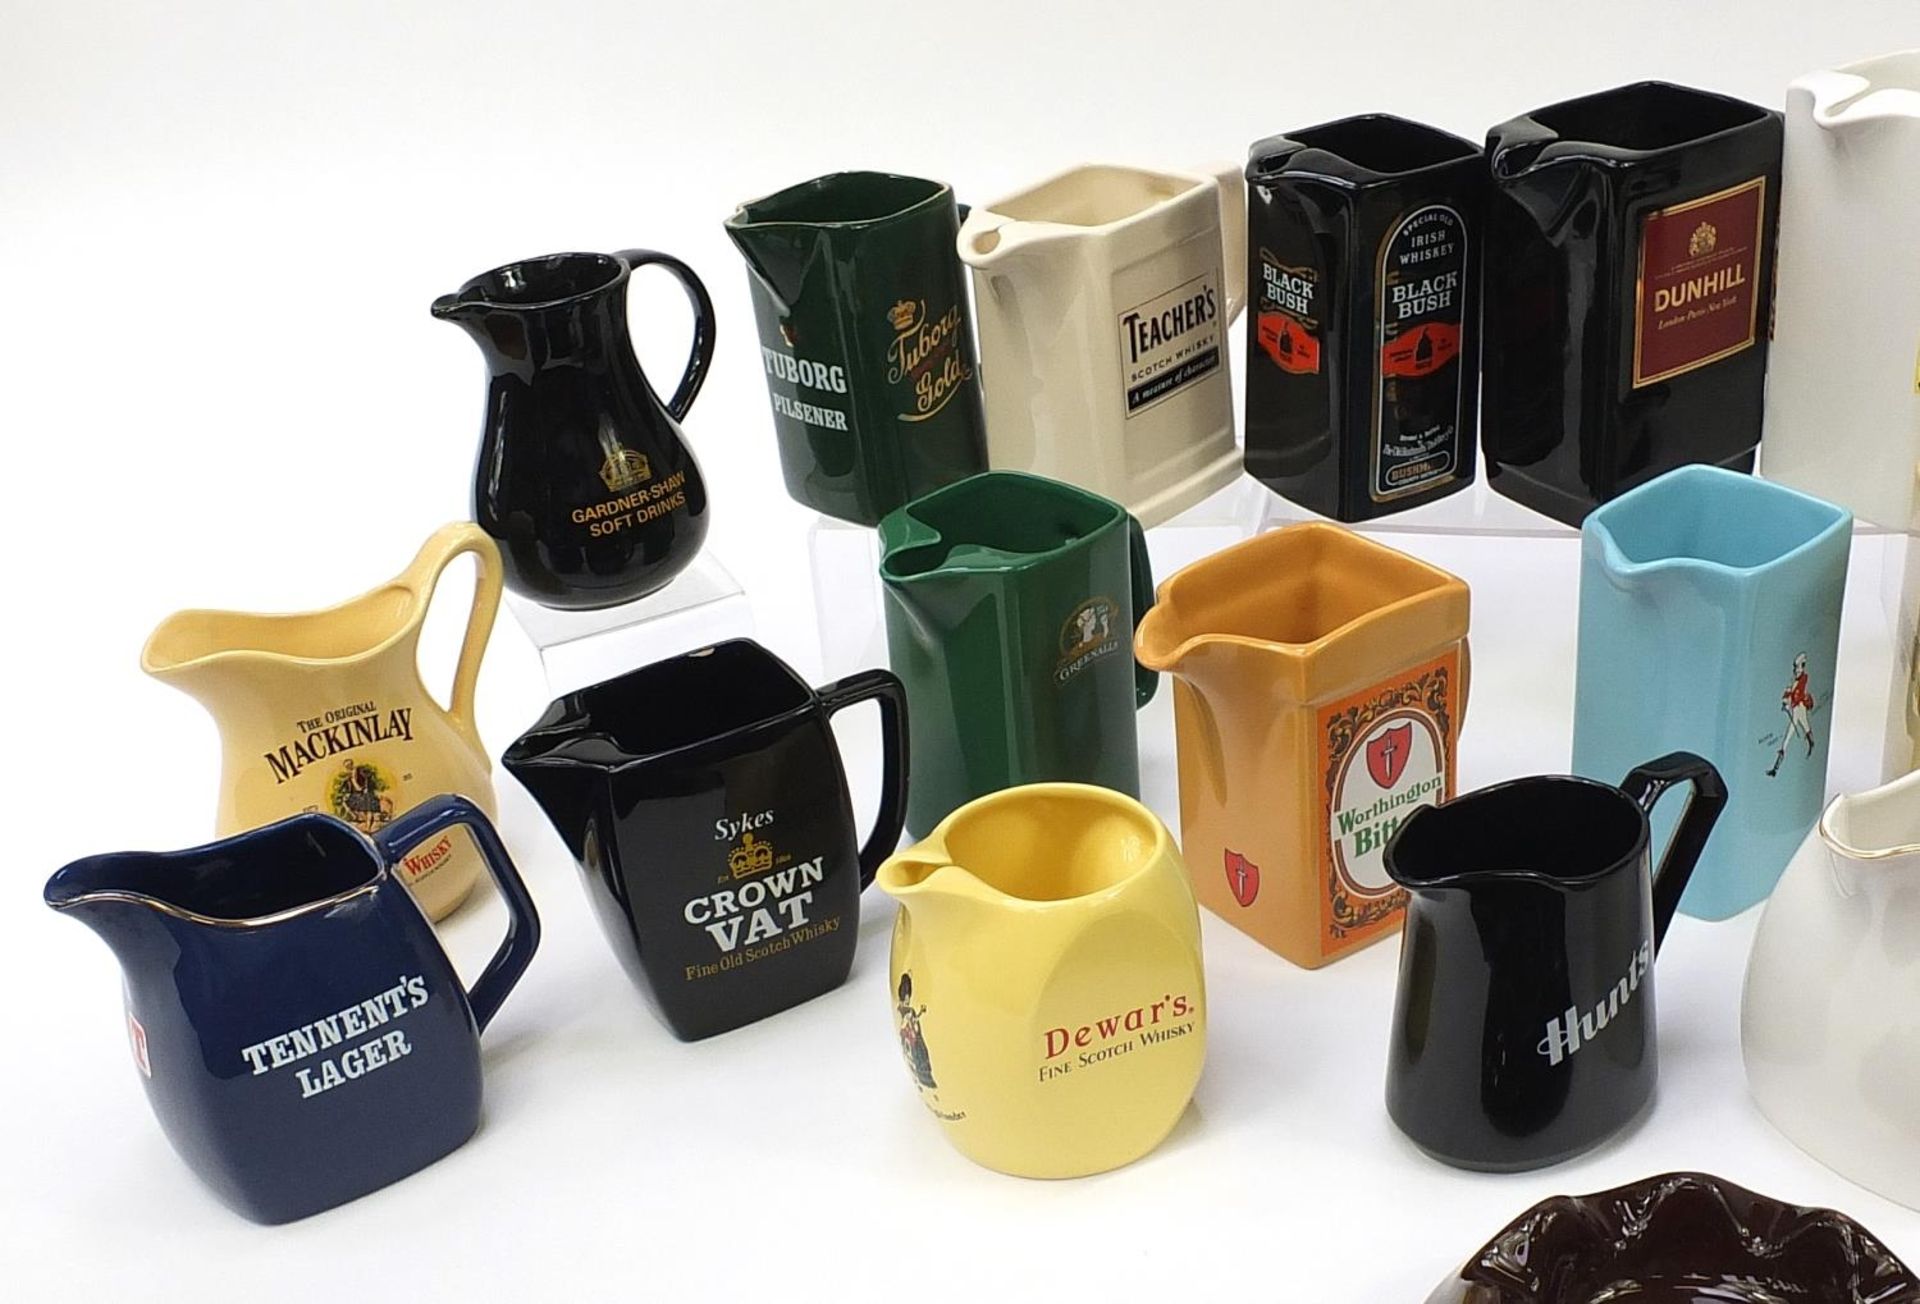 Collection of Breweranalia advertising jugs including Bells, Johnnie Walker and Teachers :For - Image 2 of 5